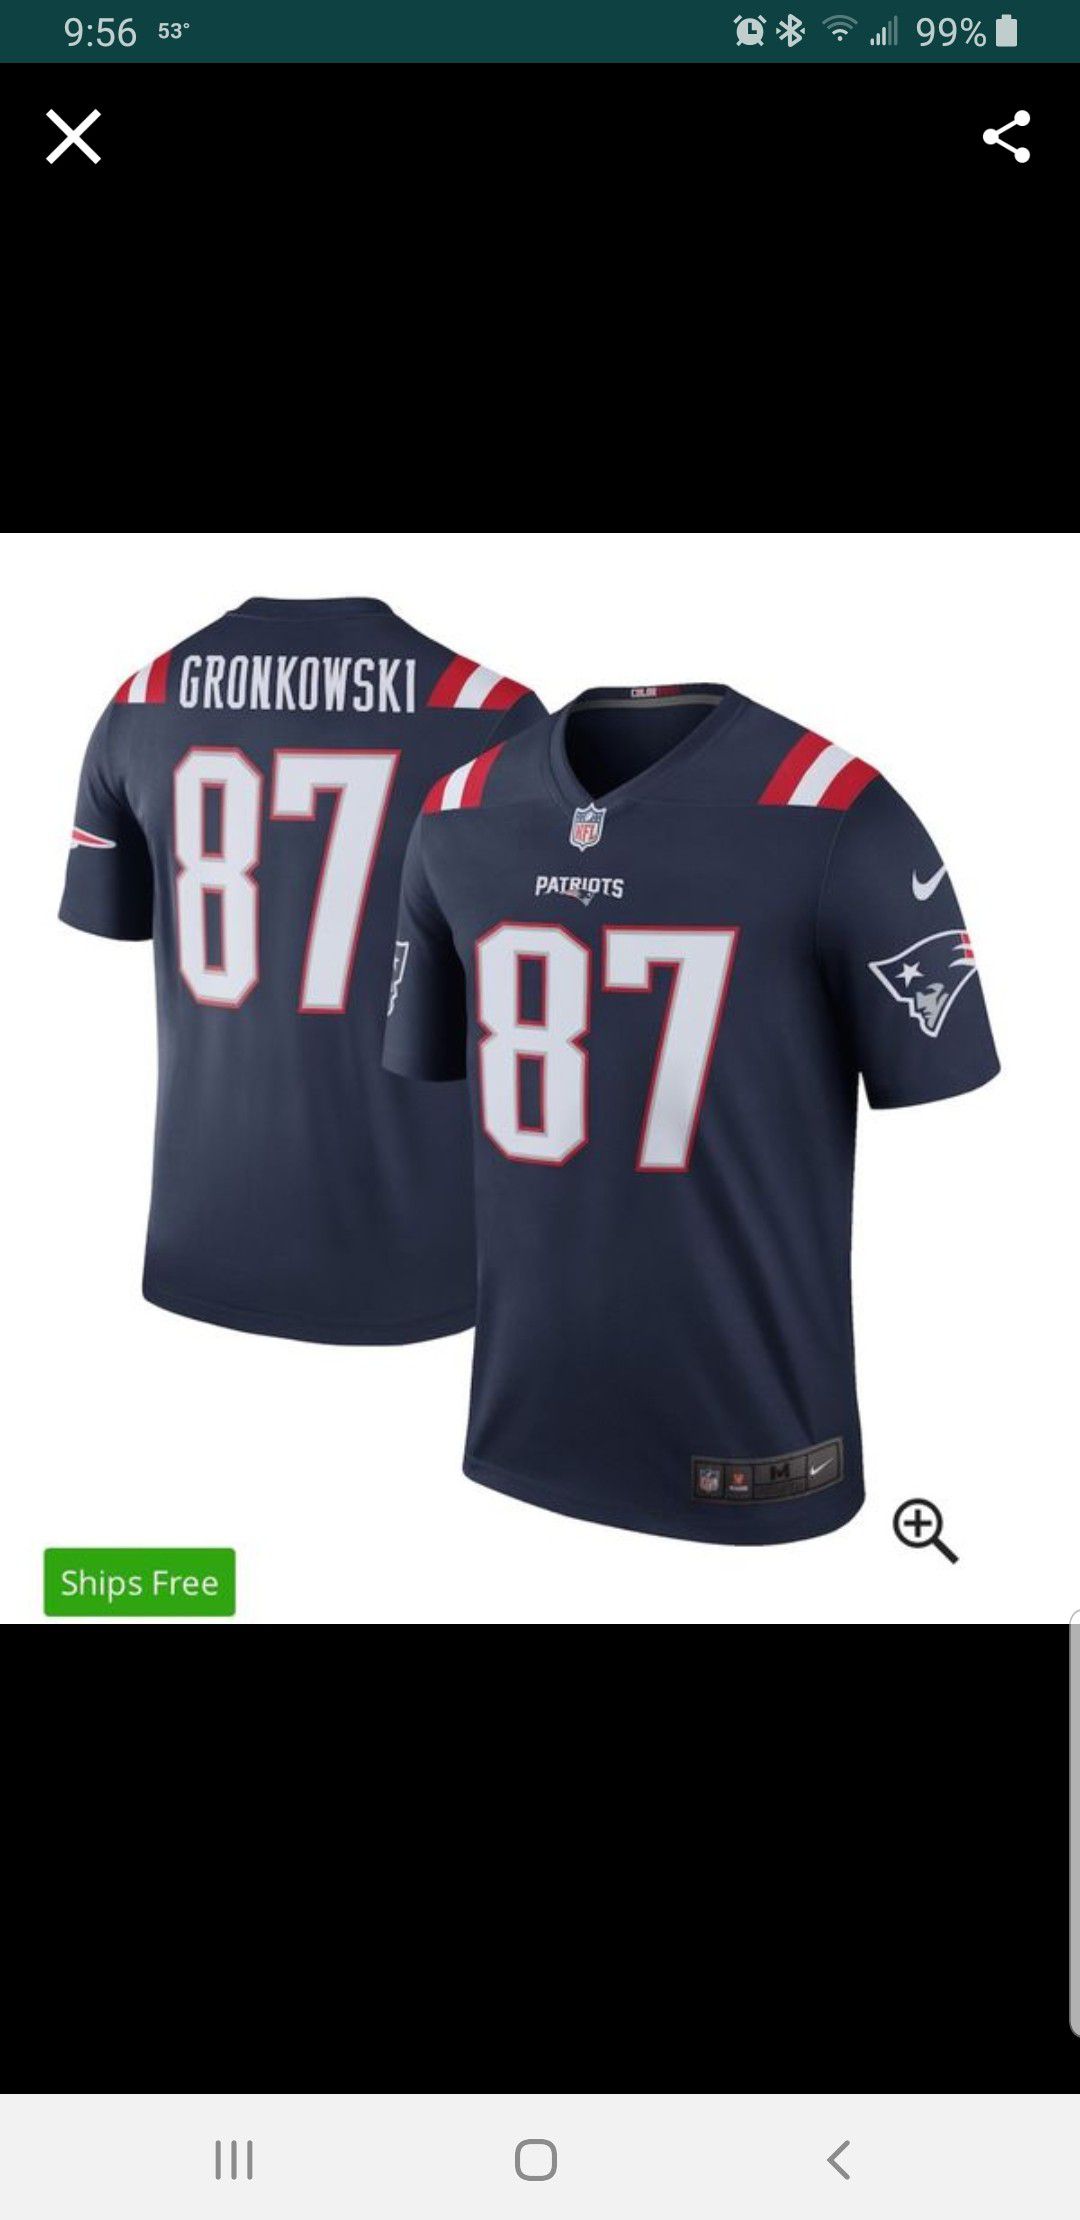 NEW ENGLAND PATRIOTS GRONKOWSKI JERSEY COLOR RUSH SIZE 3XL